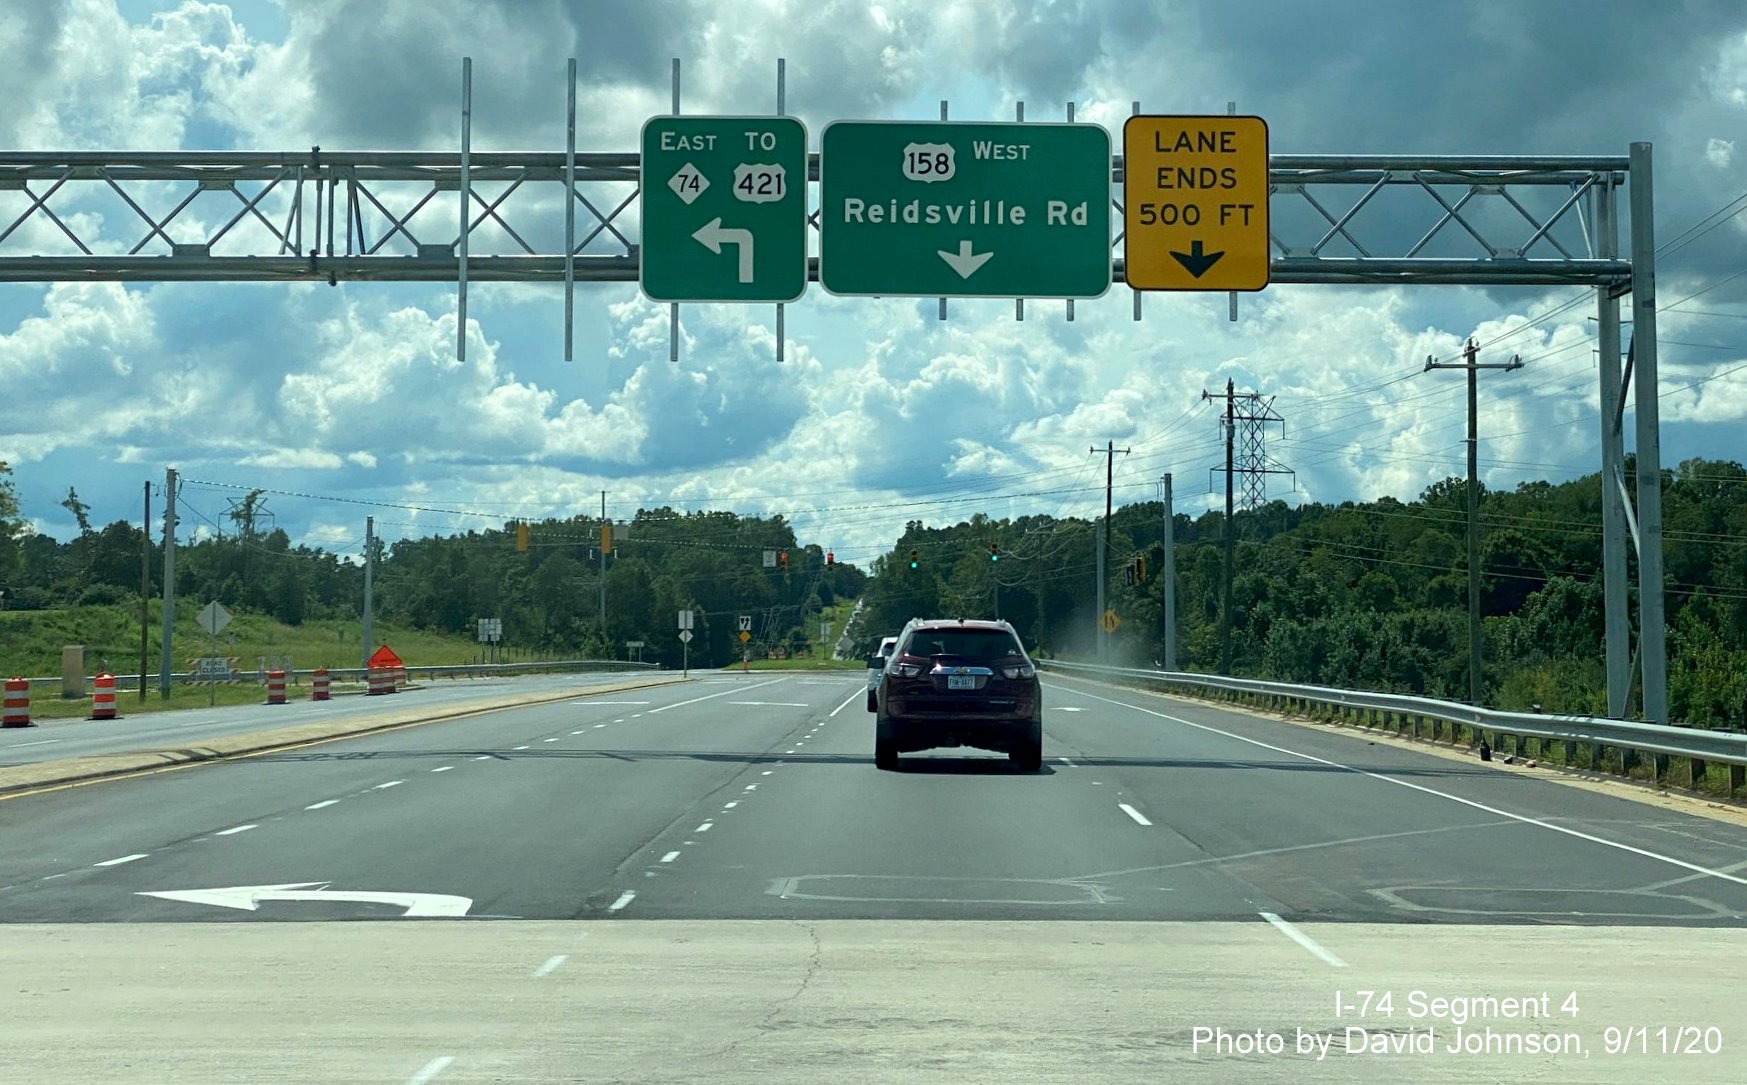 Image of overhead guide signs at ramp from US 158 West to NC 74 (Future I-74) East Winston Salem Northern Beltway, by David Johnson September 2020